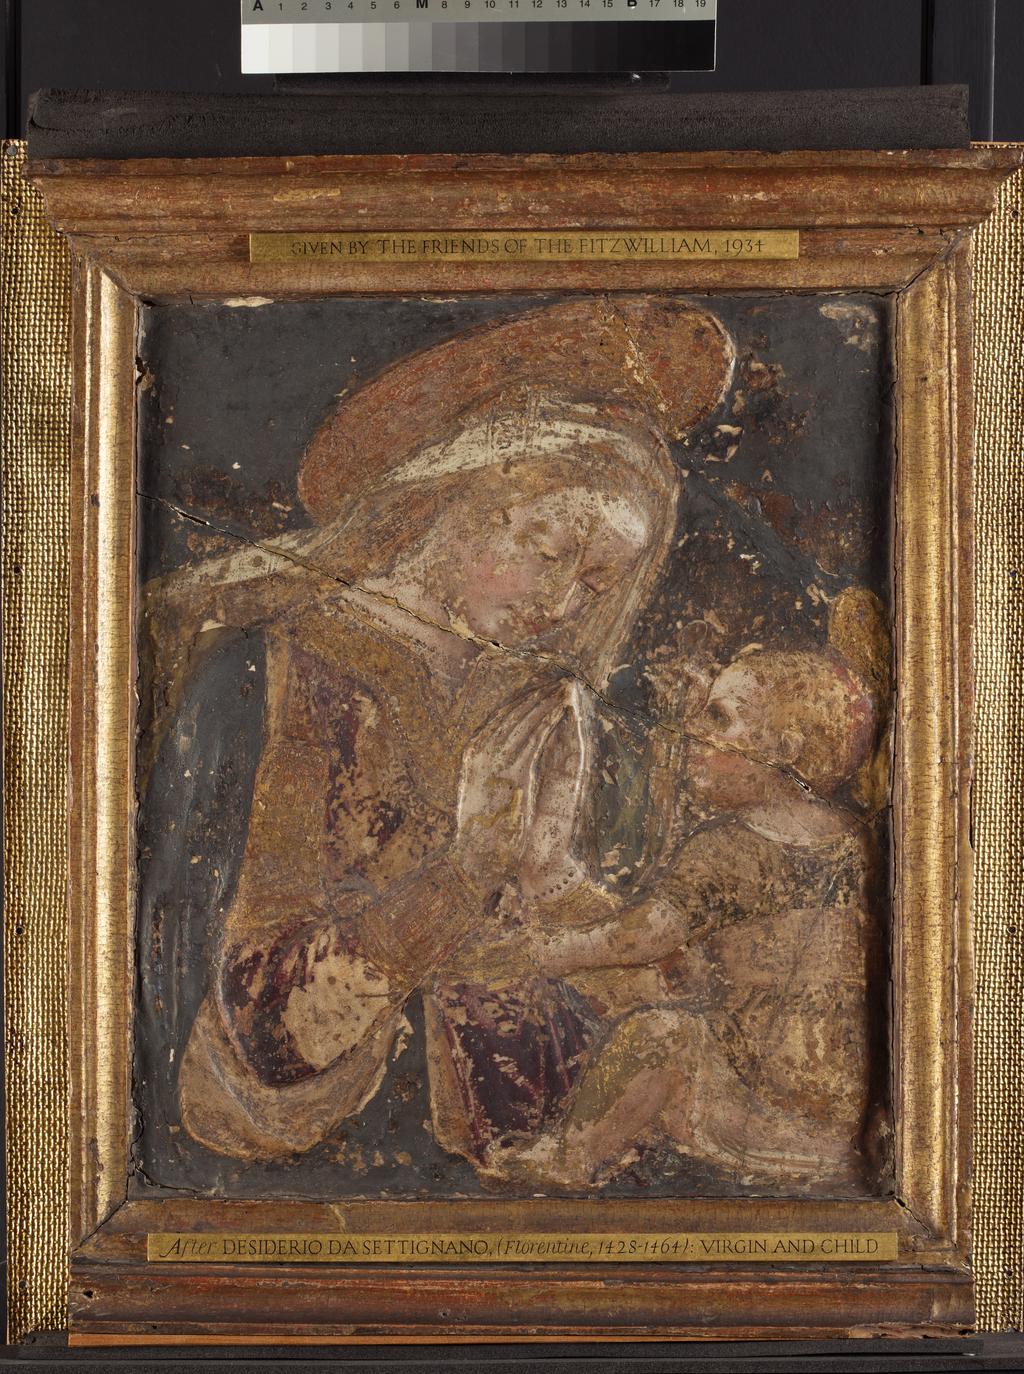 An image of Sculpture. Virgin and Child. Desiderio da Settignano, after (Italian, 1428-1464). Relief of the Virgin and Child, painted and gilt stucco. The half-length Virgin is shown in three-quarter view, in the act of praying over Christ Child. The Virgin has long, curly hair which flows behind her right shoulder. She is finely painted, and special care has been given to the decoration of her scarlet robe, veil and halo. The Christ Child, seen in profile, is sitting in front of his mother. He is dressed in a robe and a tall waist-belt and he is indicating the Virgin with his left hand, whilst clasping an end of the Virgin’s veil with his right hand. The halo of Christ Child is also finely decorated. The figures are set against a flat painted background. Stucco, painted and gilded, height, frame, 57.1 cm, width 43.4 cm, depth 7 cm, height, object, 52 cm, width 43.2 cm, depth 6.5 cm, circa 1450-circa 1460. Renaissance. Florentine School.